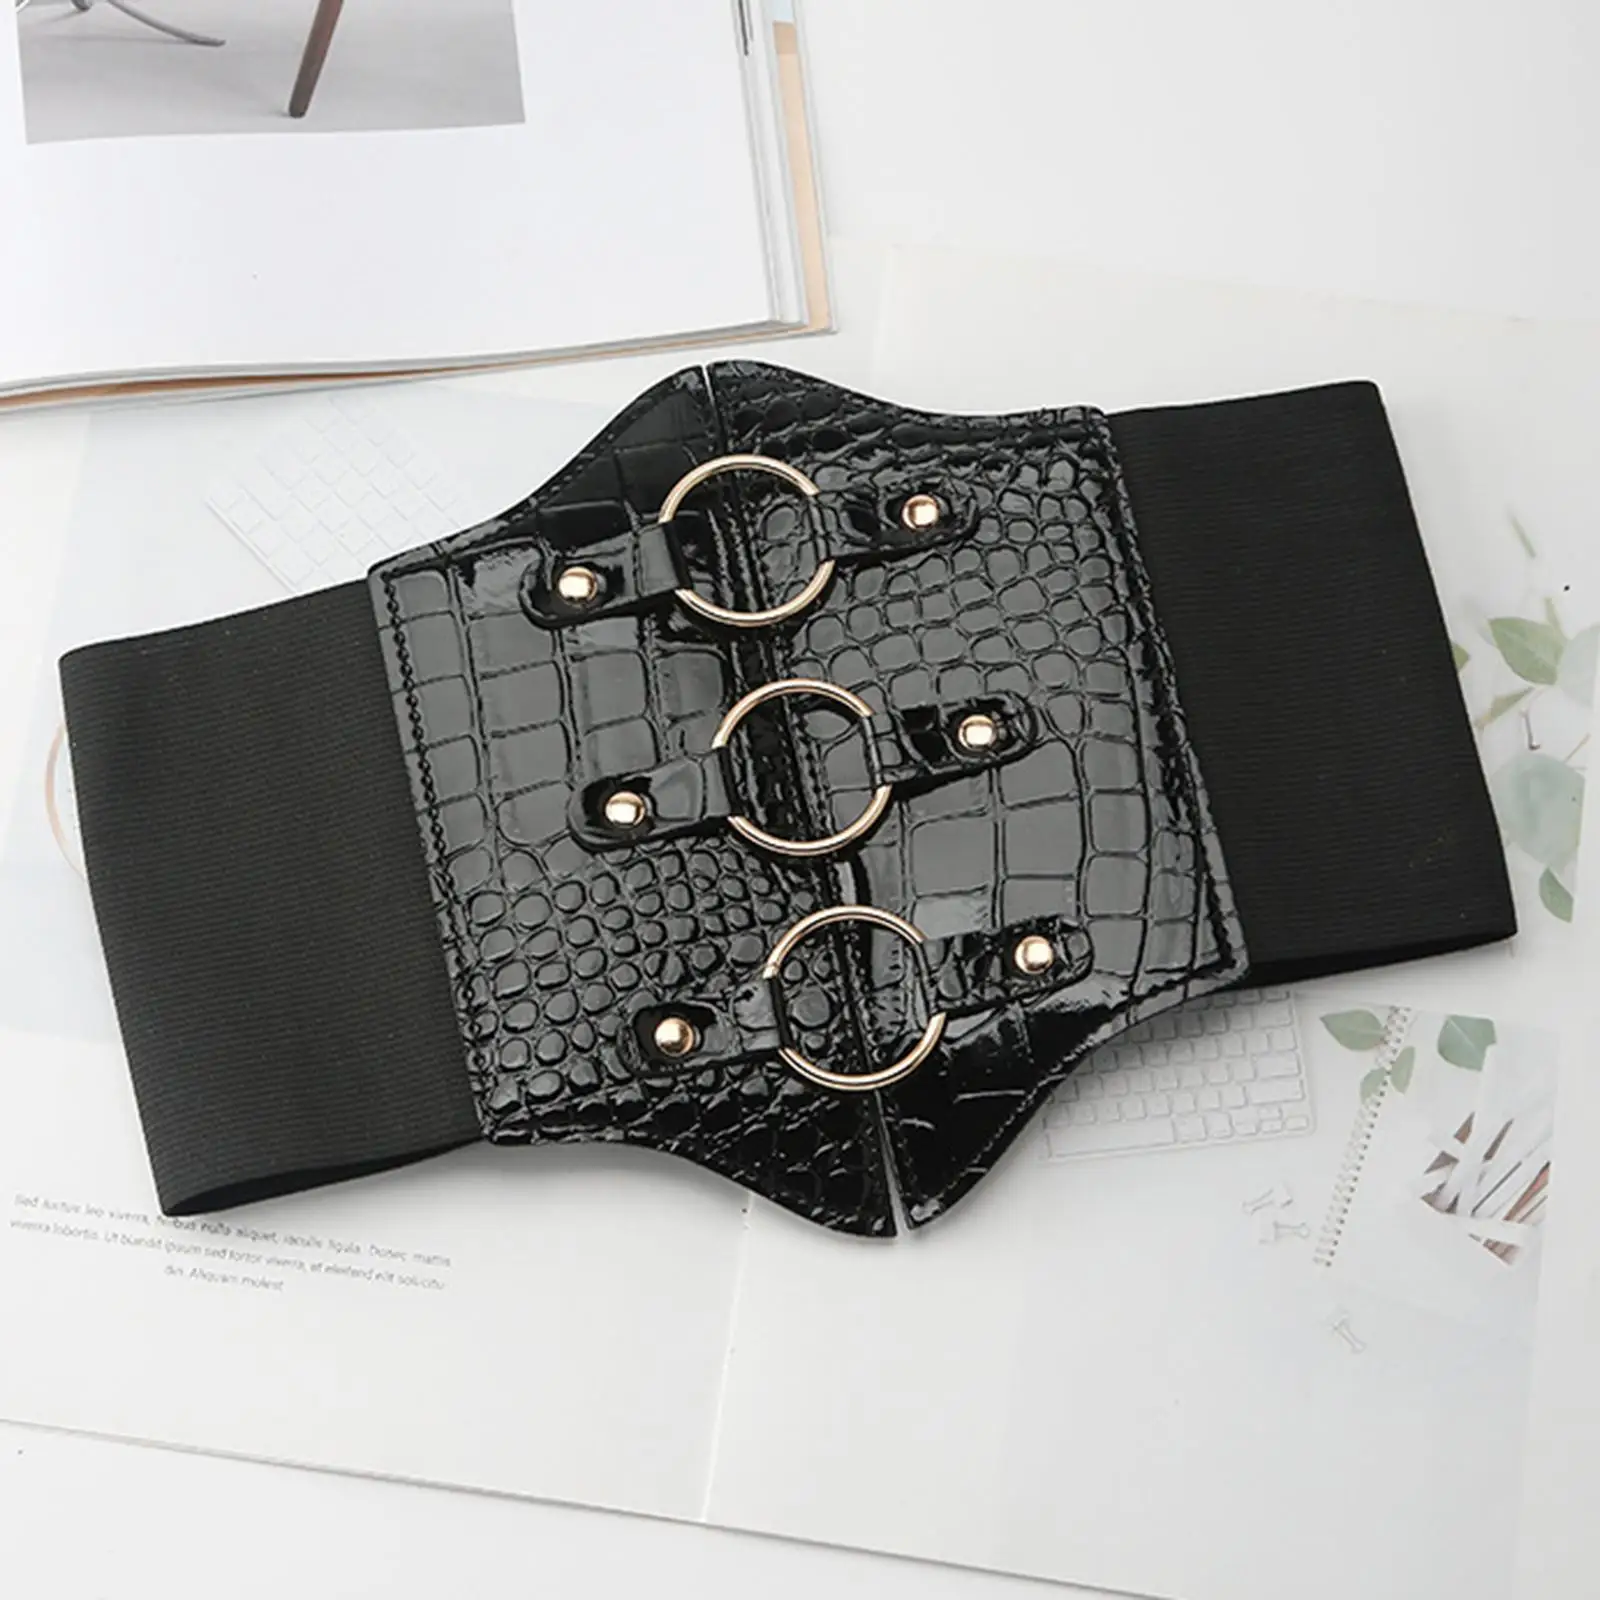 Retro Style Women Charm Waistband Wide High Waist Body Link Belts Ladies Coat Cincher Jewelry Belt for Dresses Party Cosplay